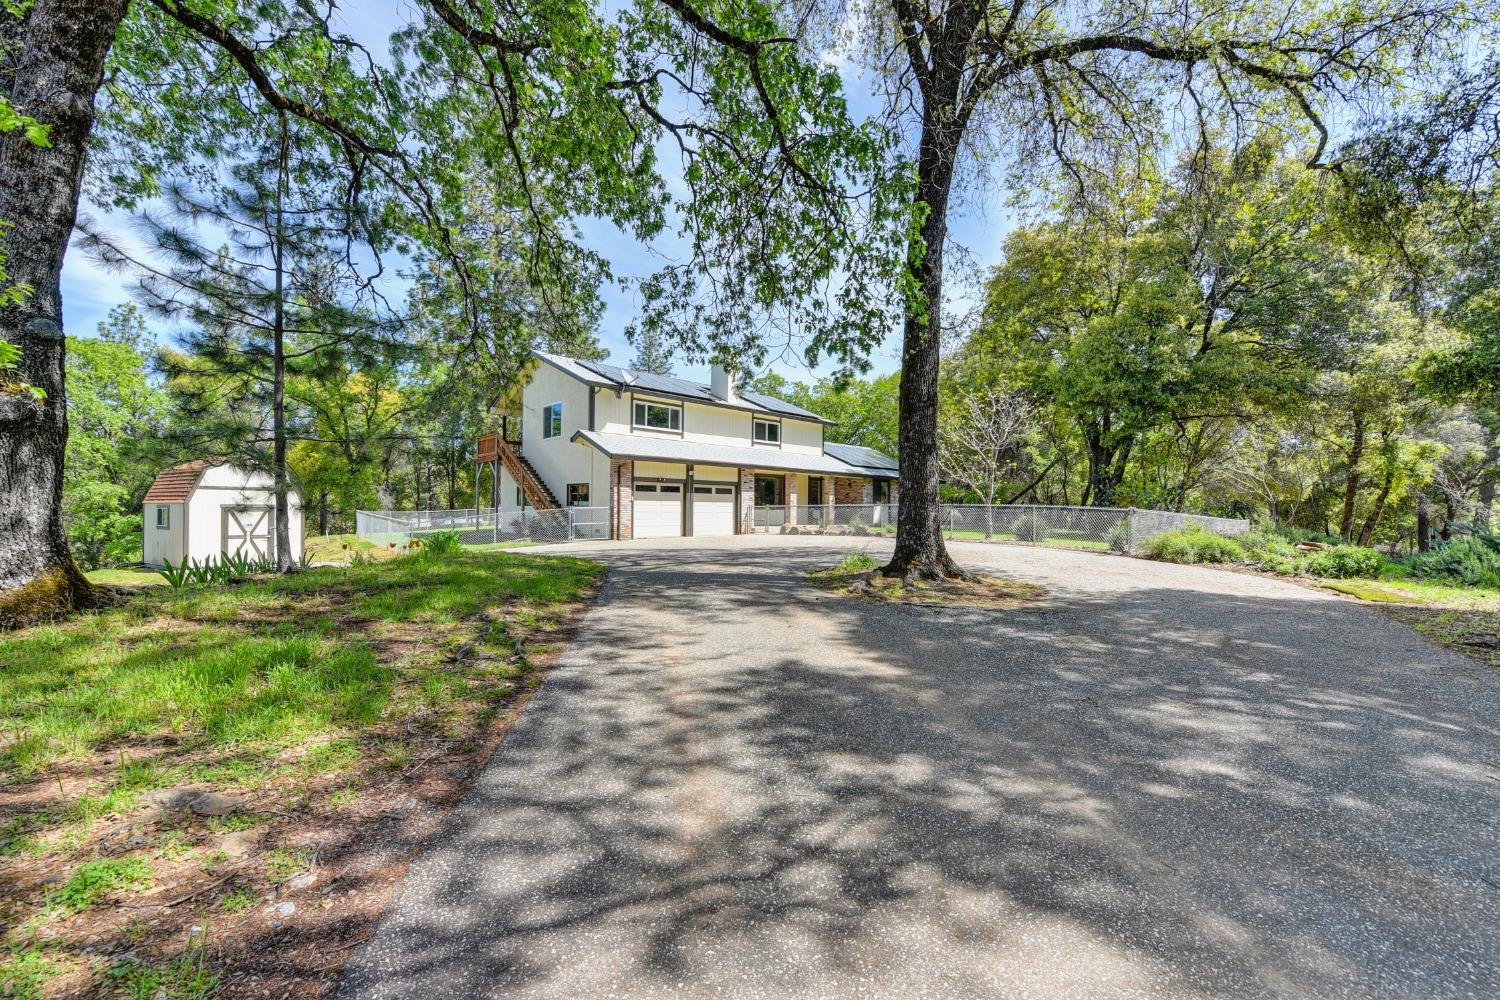 Photo of 20840 Inspiration Ln in Grass Valley, CA